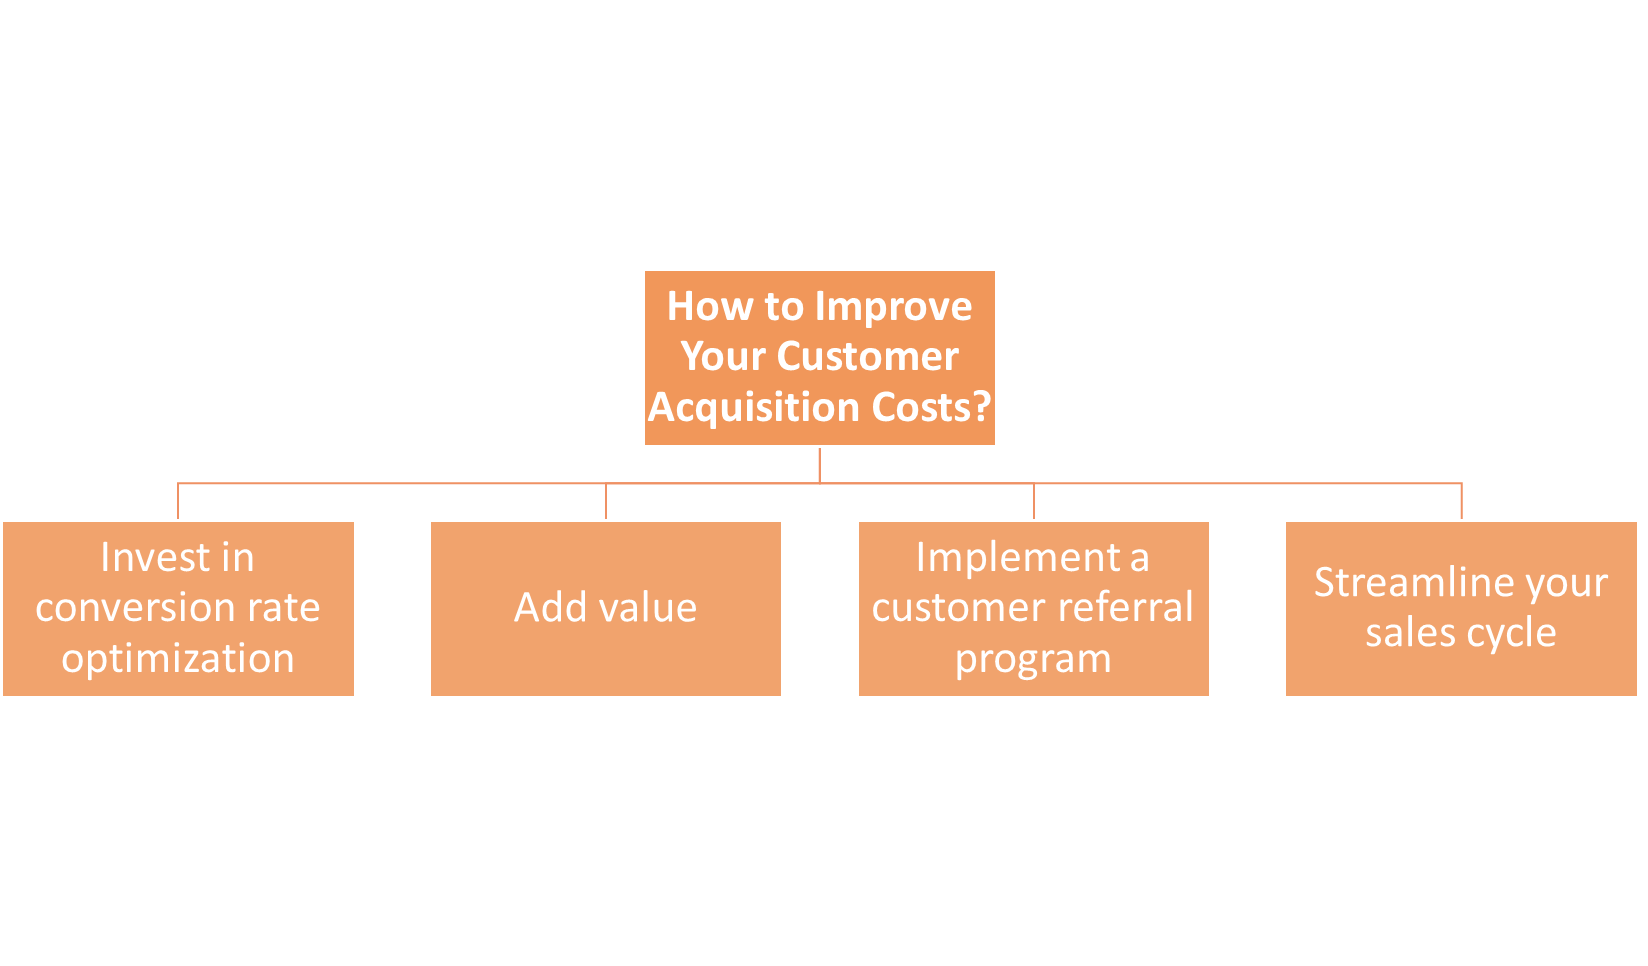 How to Improve Your Customer Acquisition Costs?